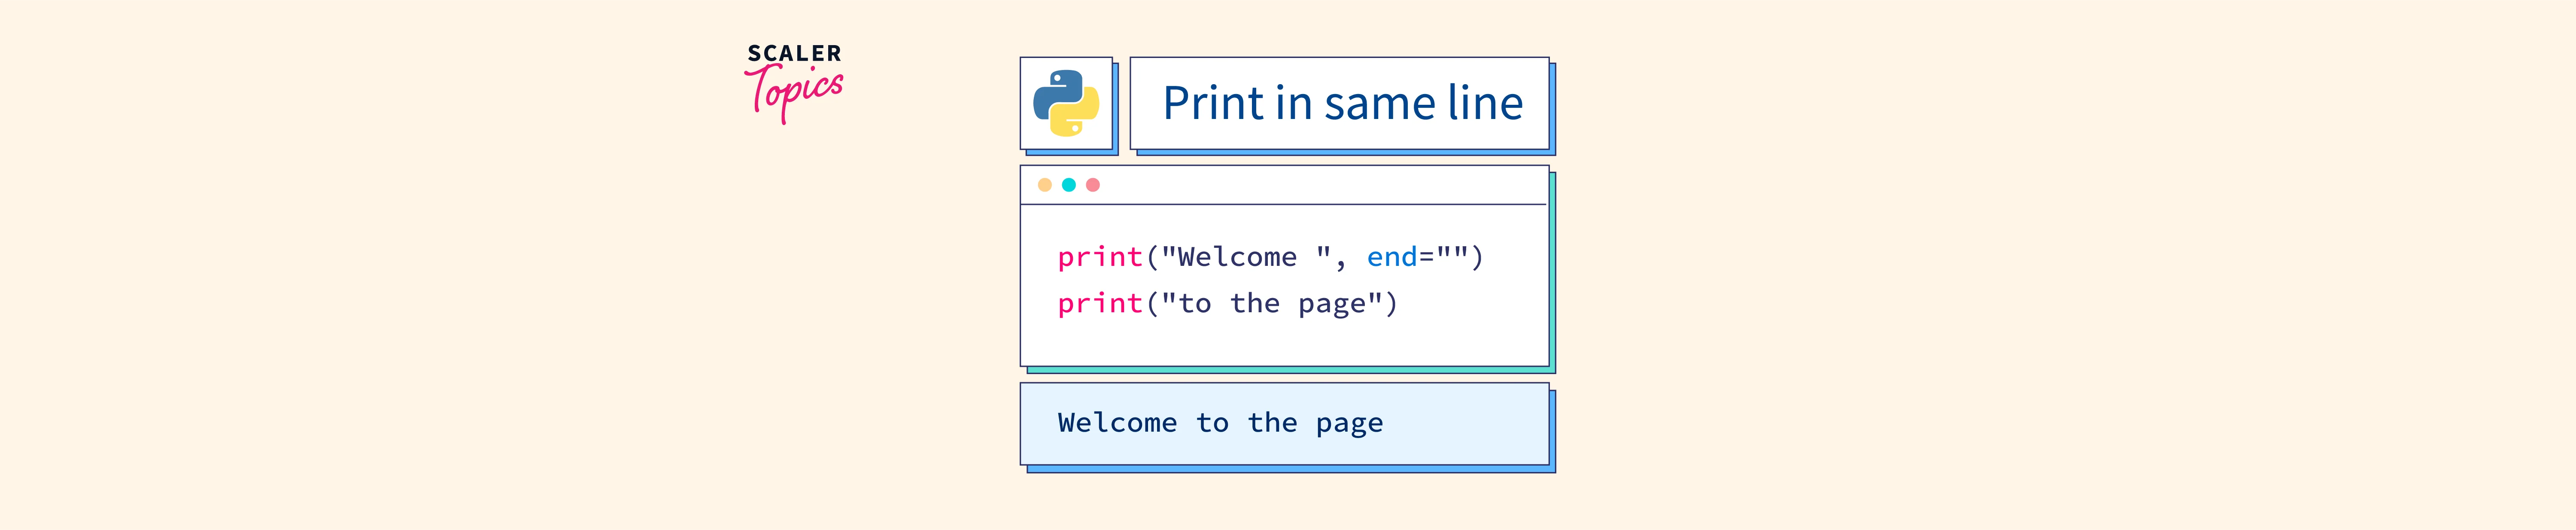 How to Print in Same Line in Python? Scaler Topics